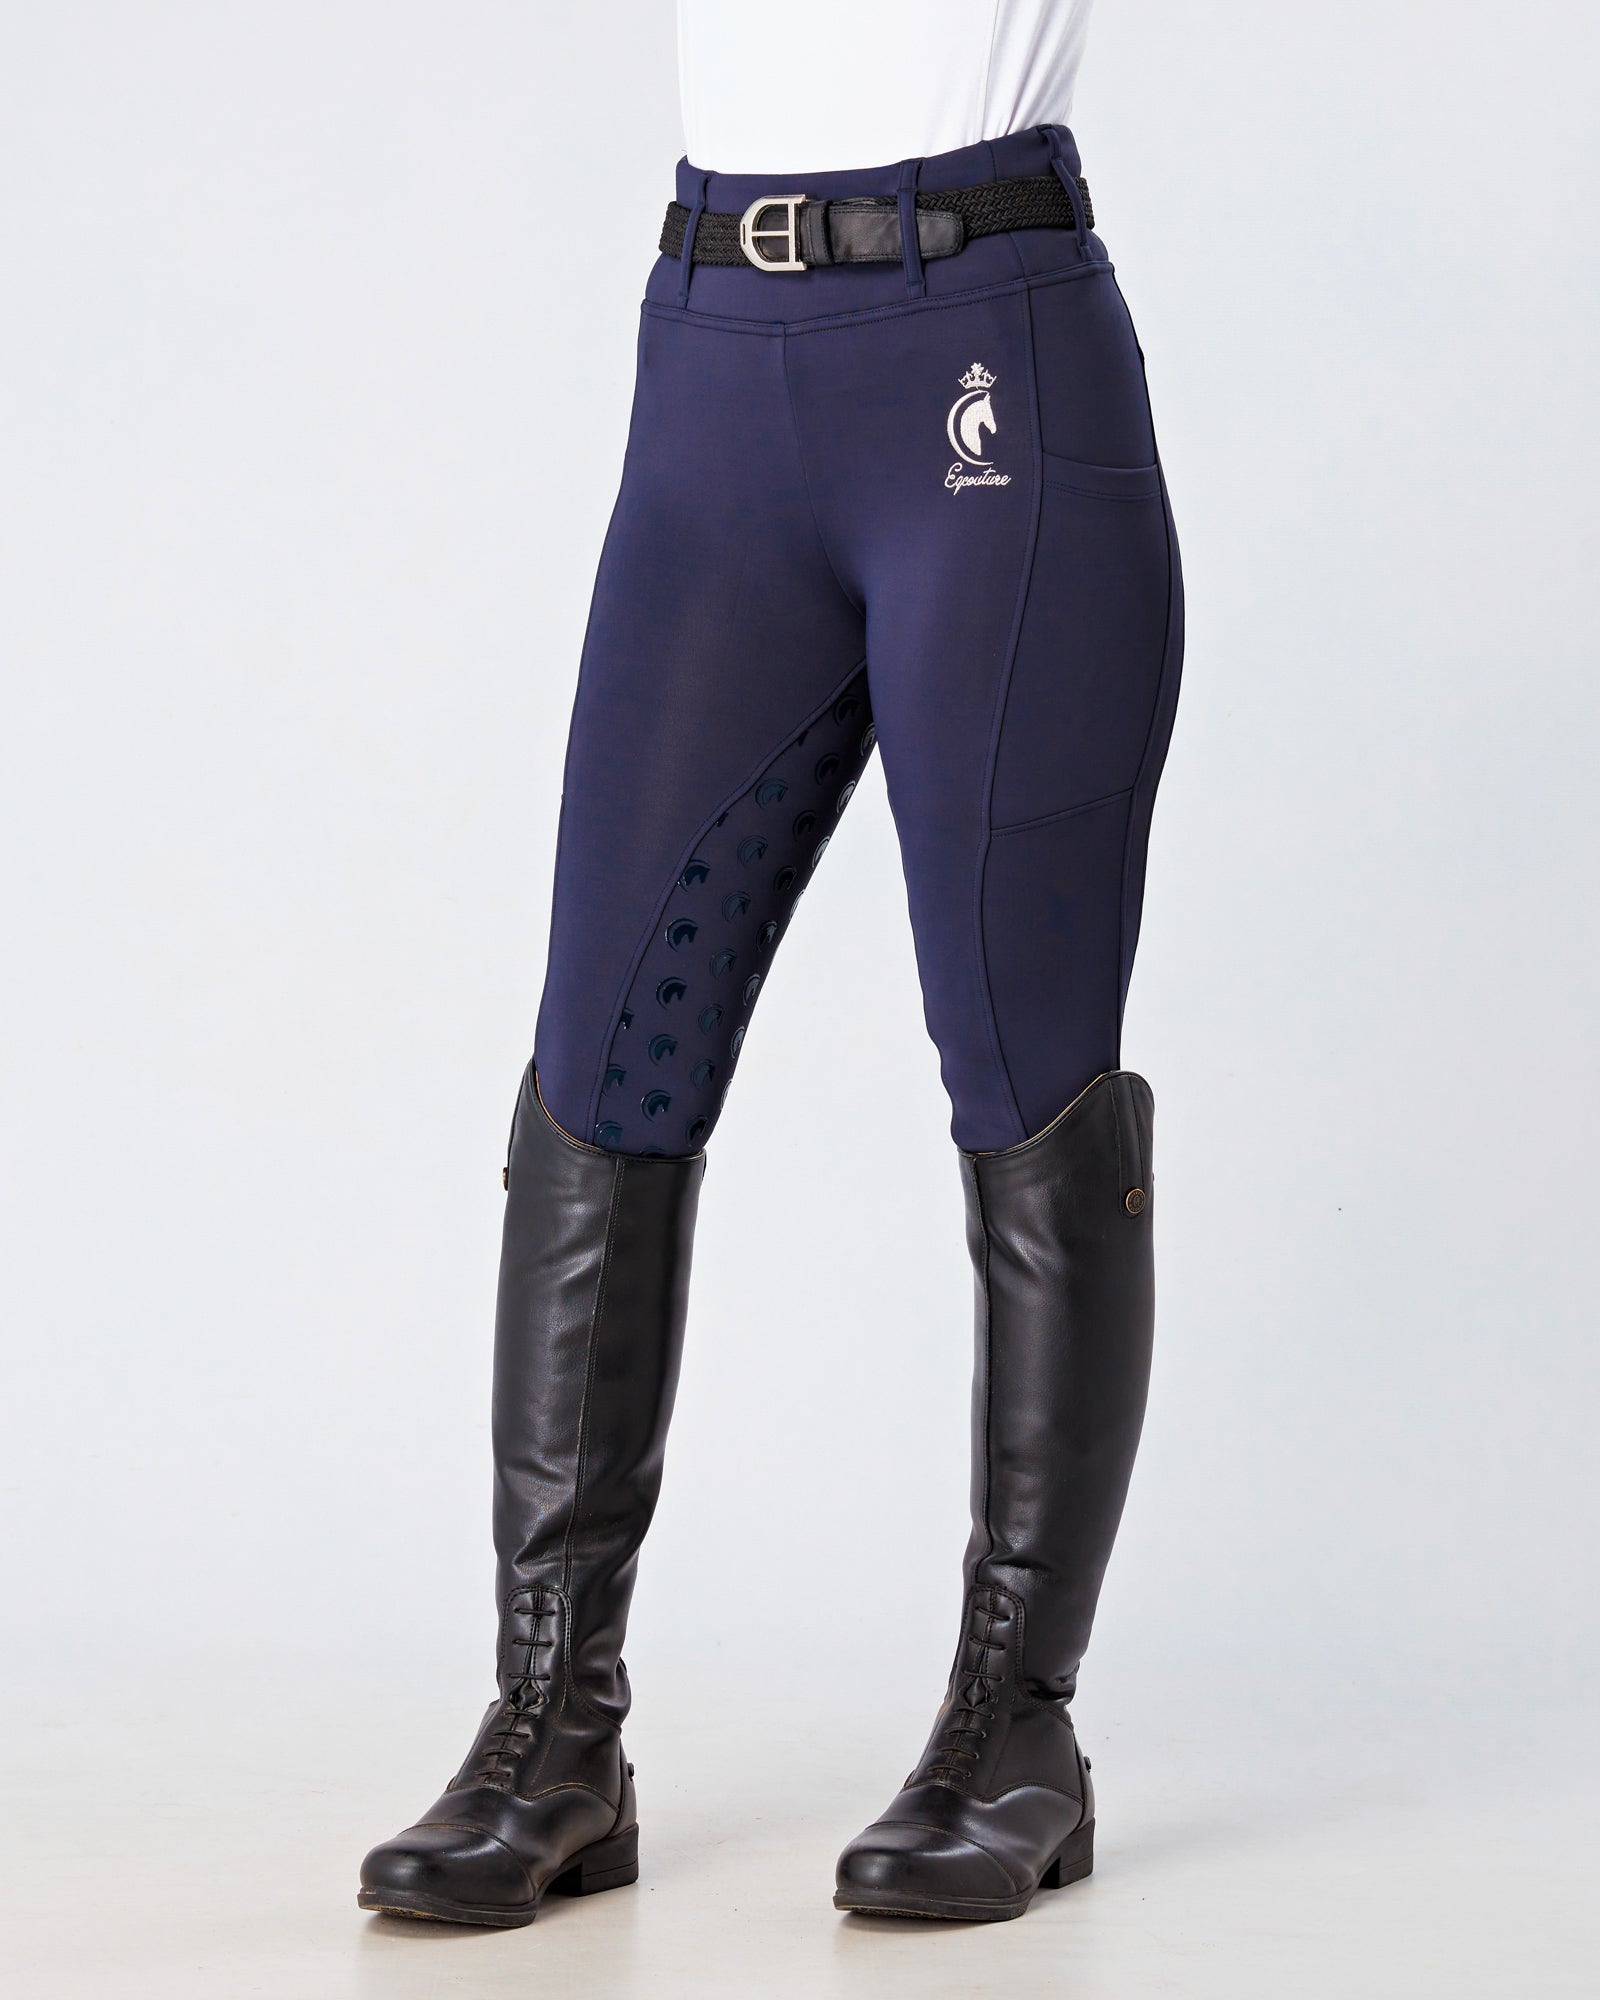 WINTER Thermal Navy Horse Riding Tights / Leggings with pockets  - WATER RESISTANT